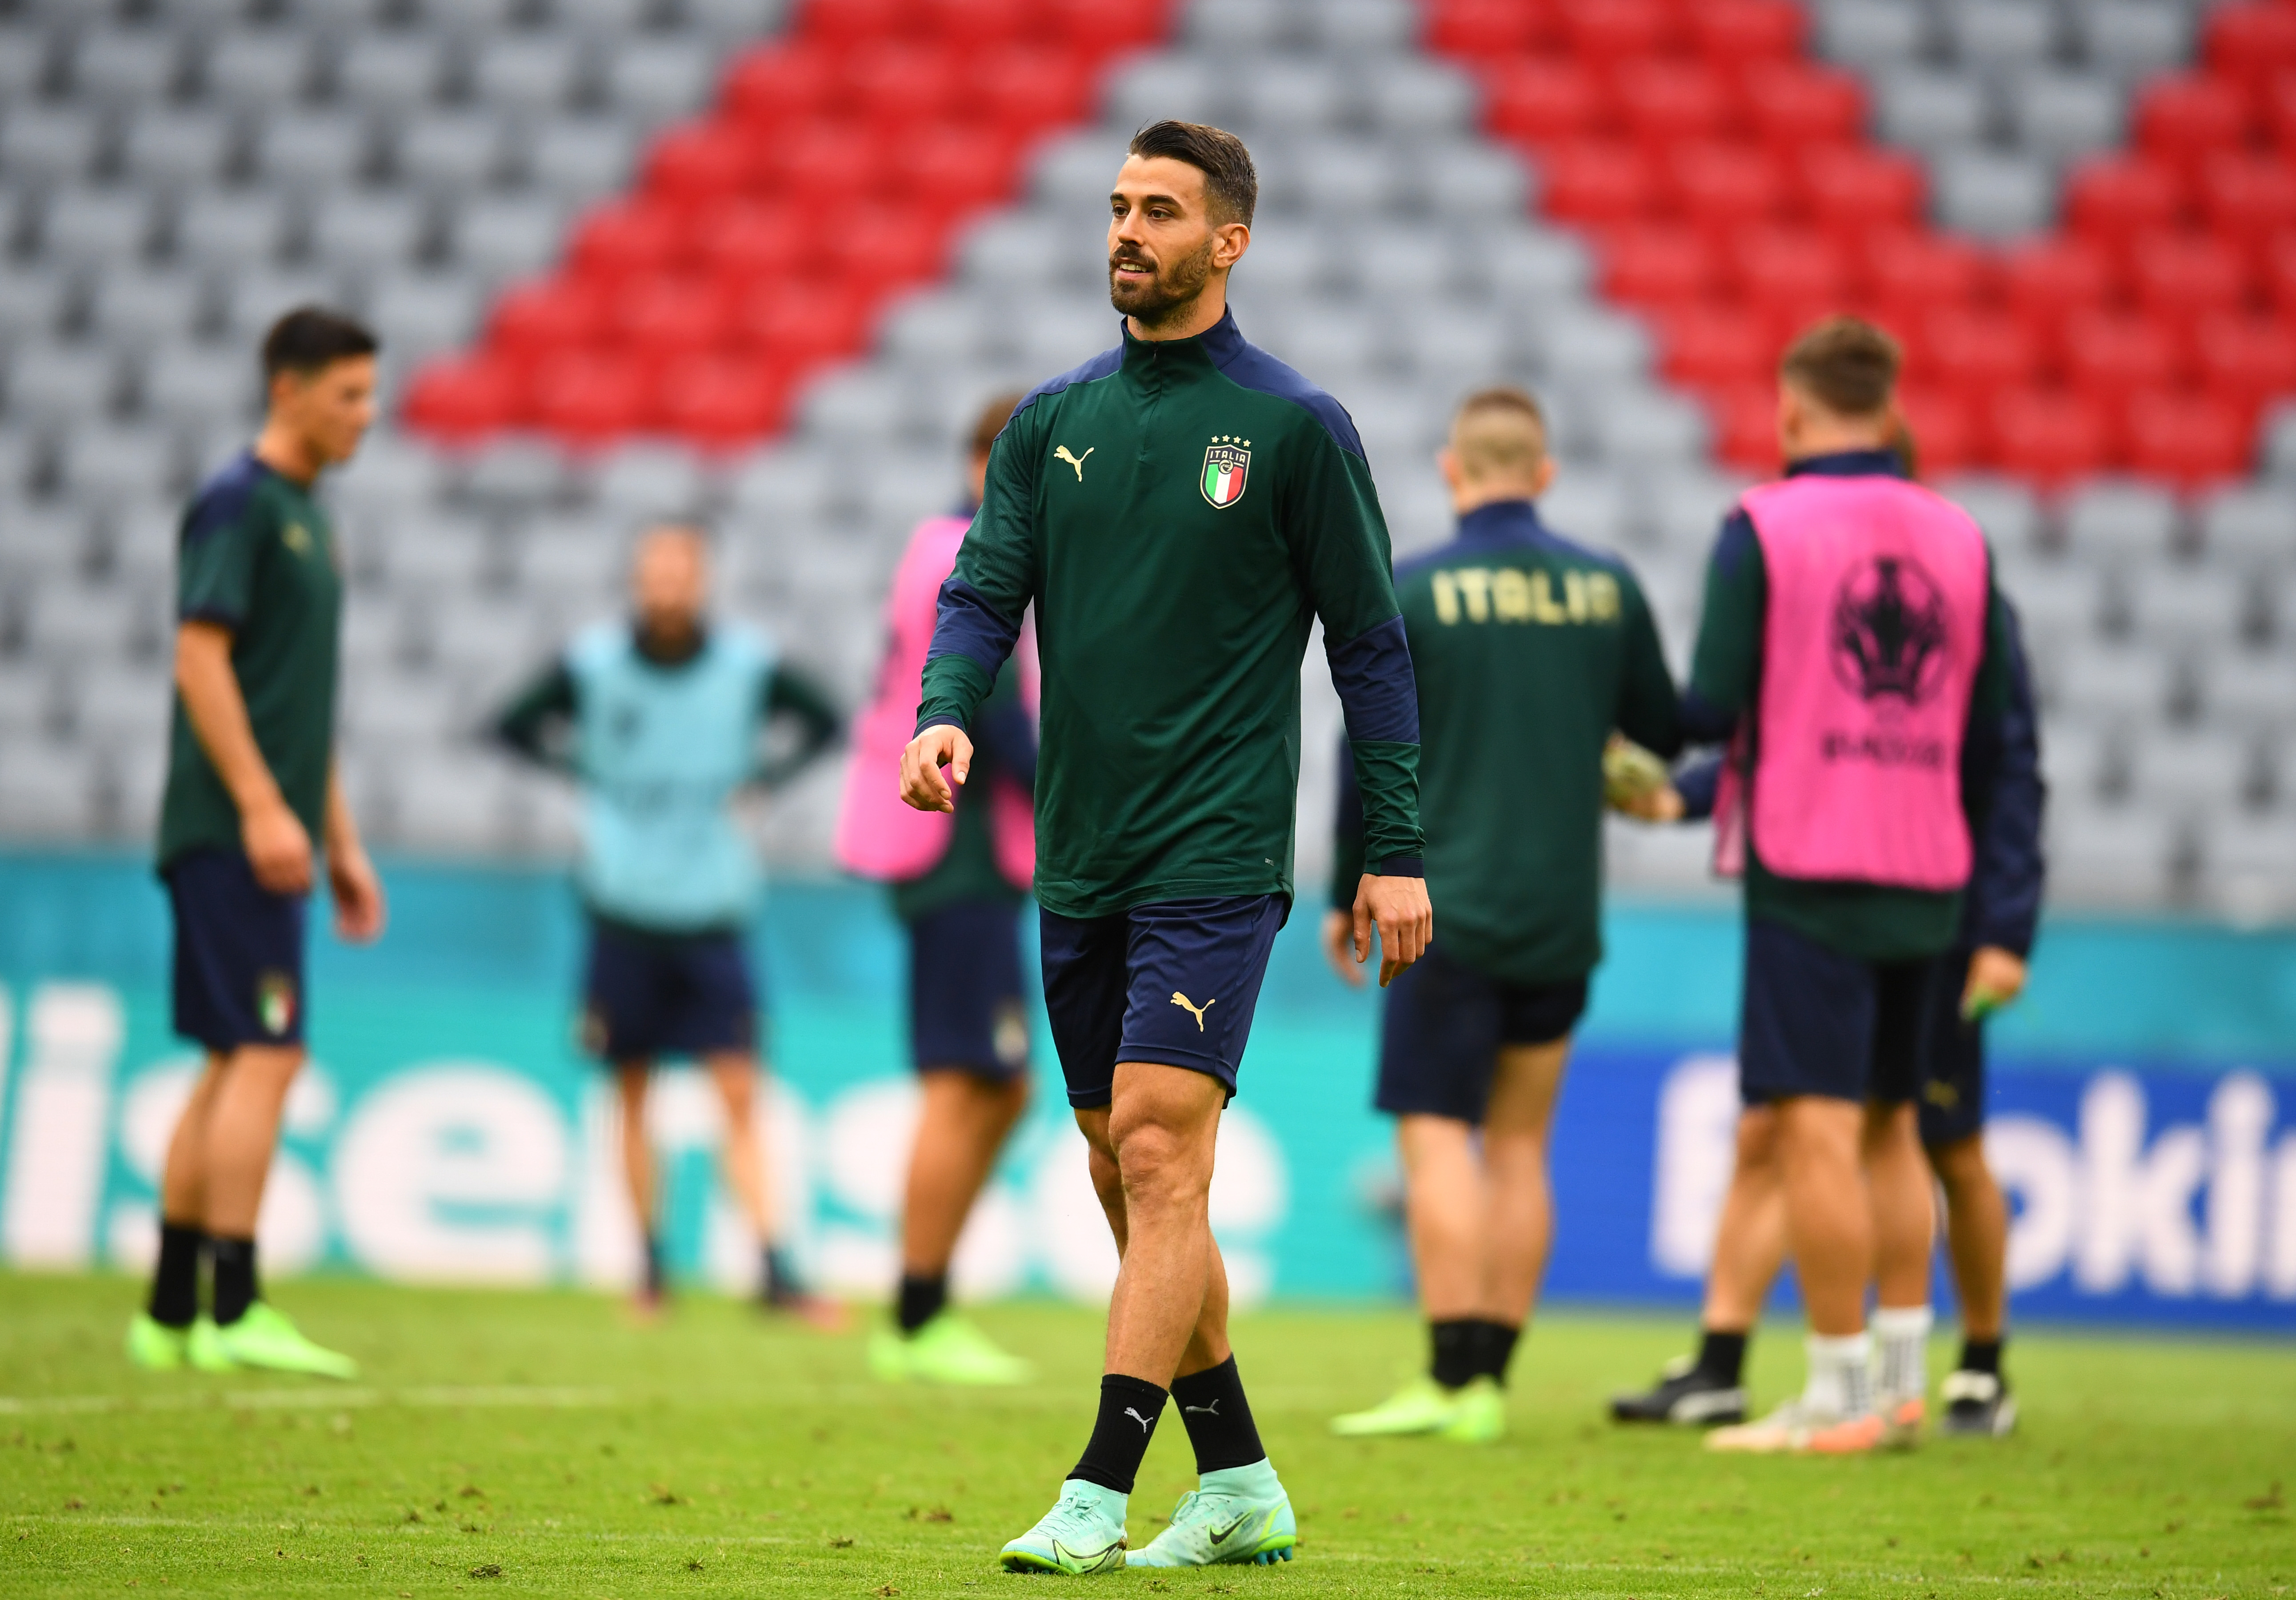 Italy Training Session and Press Conference - UEFA Euro 2020: Quarter-final